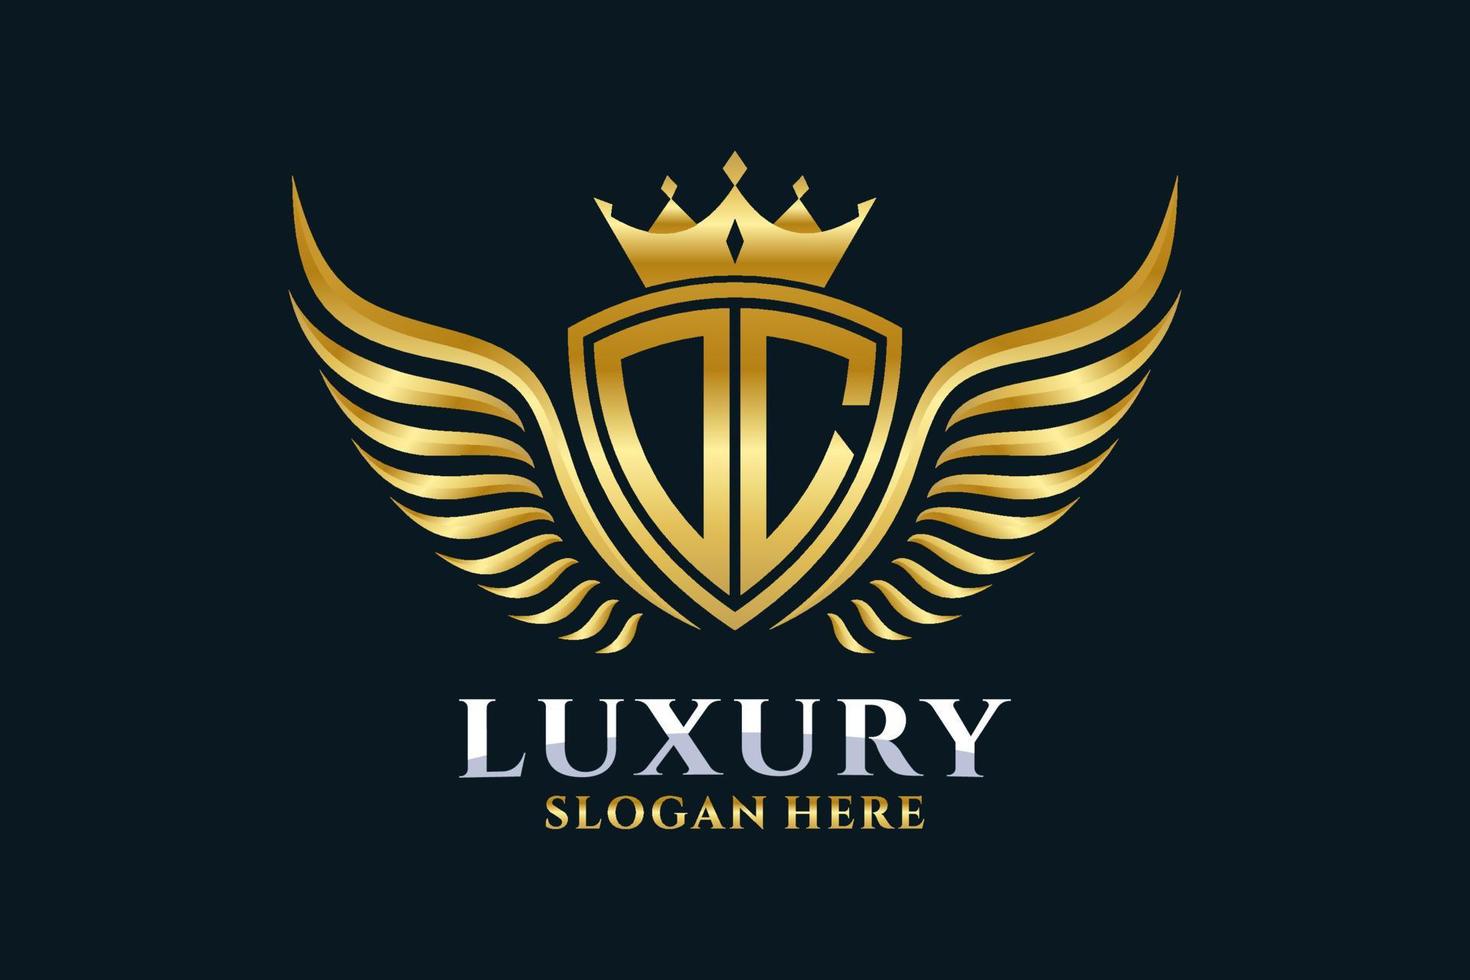 Luxury royal wing Letter OC crest Gold color Logo vector, Victory logo, crest logo, wing logo, vector logo template.